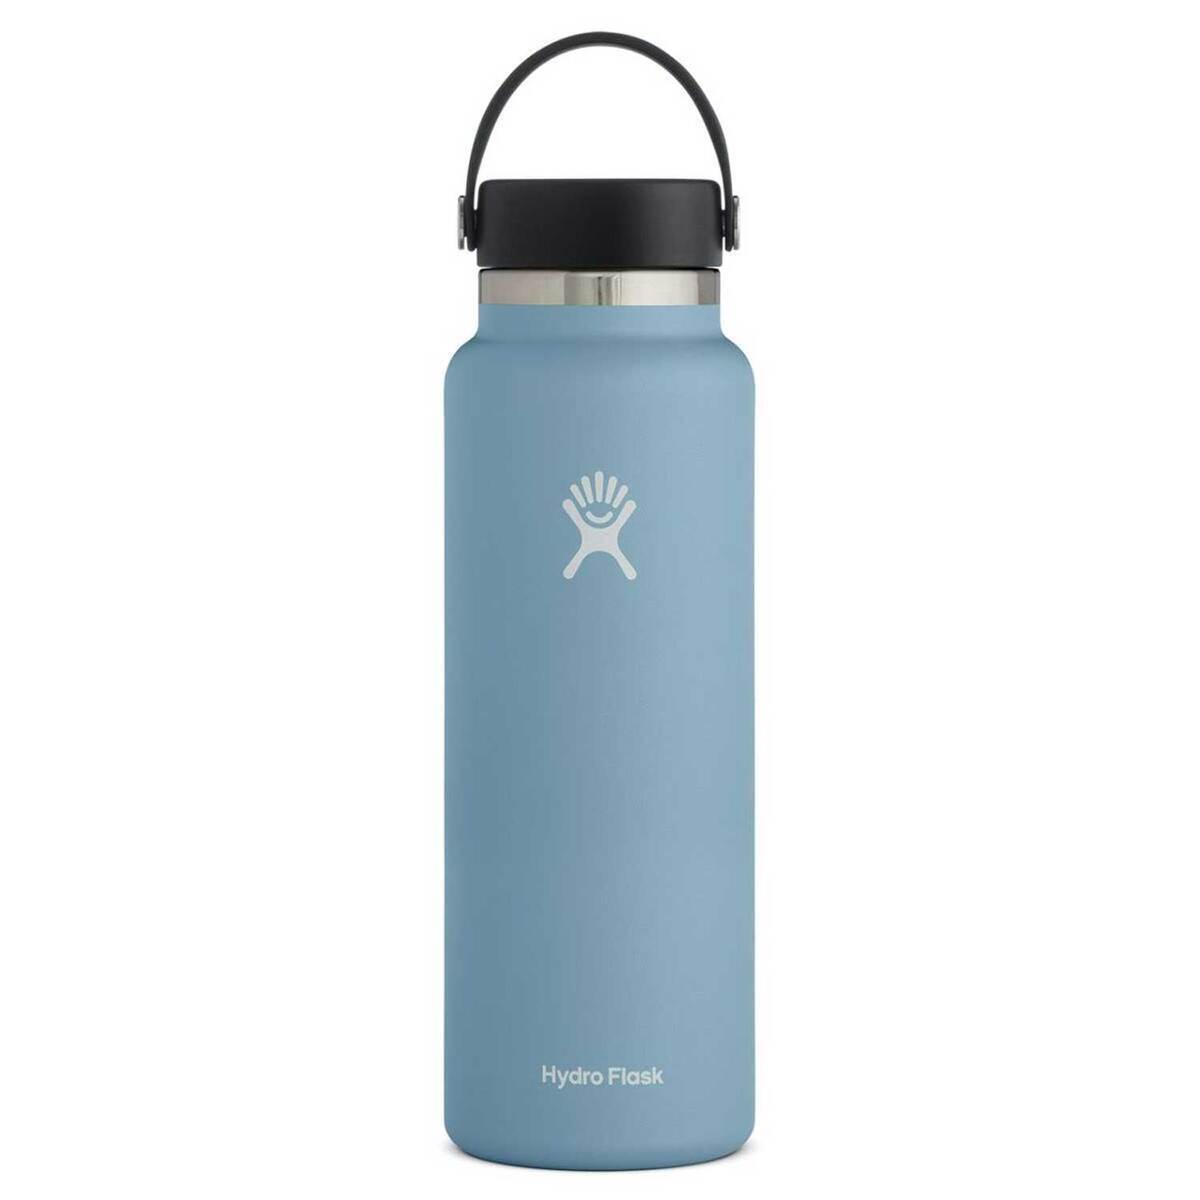 Hydro Flask - 40oz. Vacuum Insulated Stainless Steel Water Bottle Spring 2023 Colors